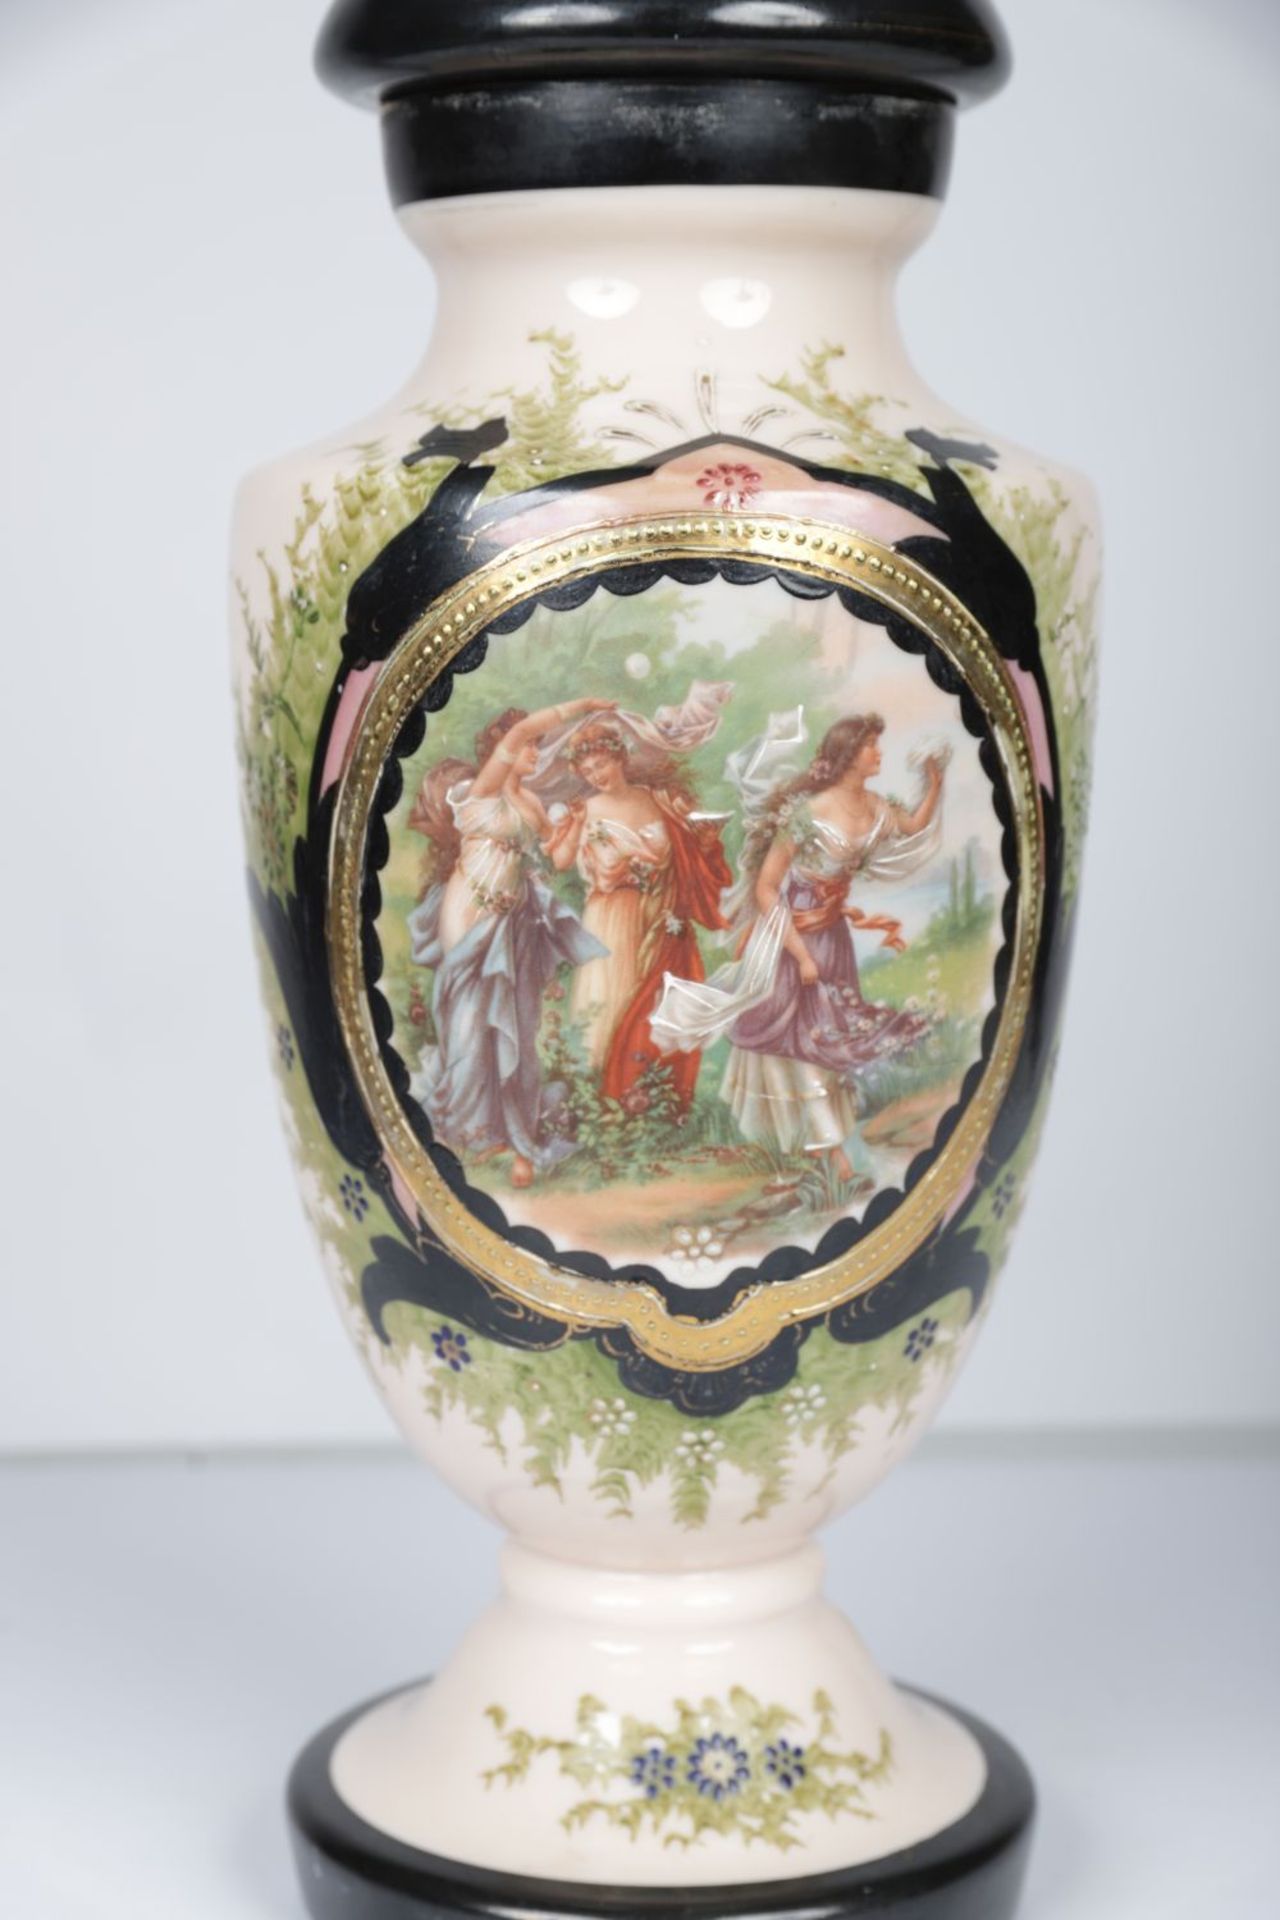 VICTORIAN PAINTED GLASS VASE - Image 2 of 2